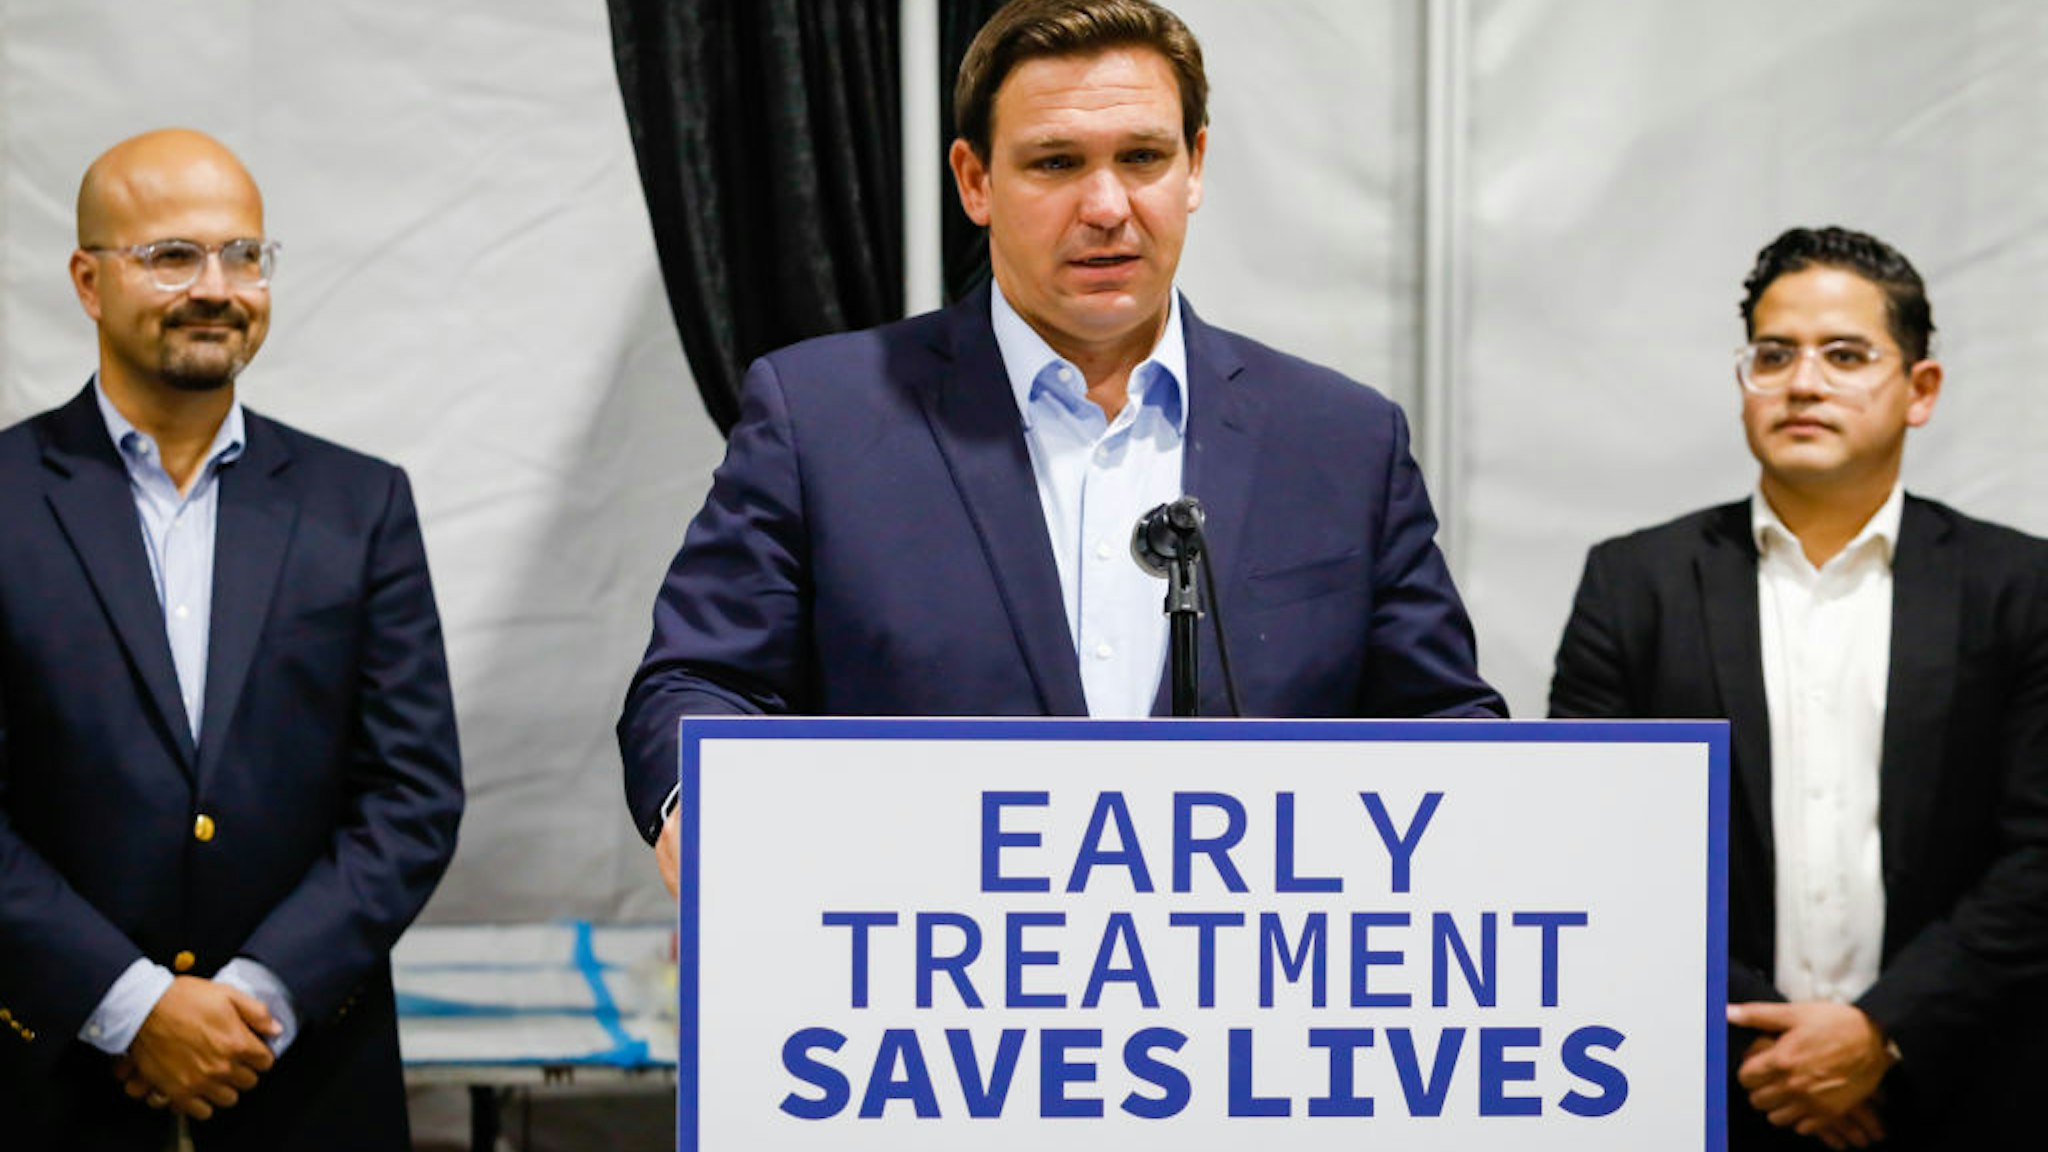 Ron DeSantis, governor of Florida, center, speaks during a news conference at a Regeneron monoclonal antibody clinic in Pembroke Pines, Florida, U.S., on Wednesday, Aug. 18, 2021.